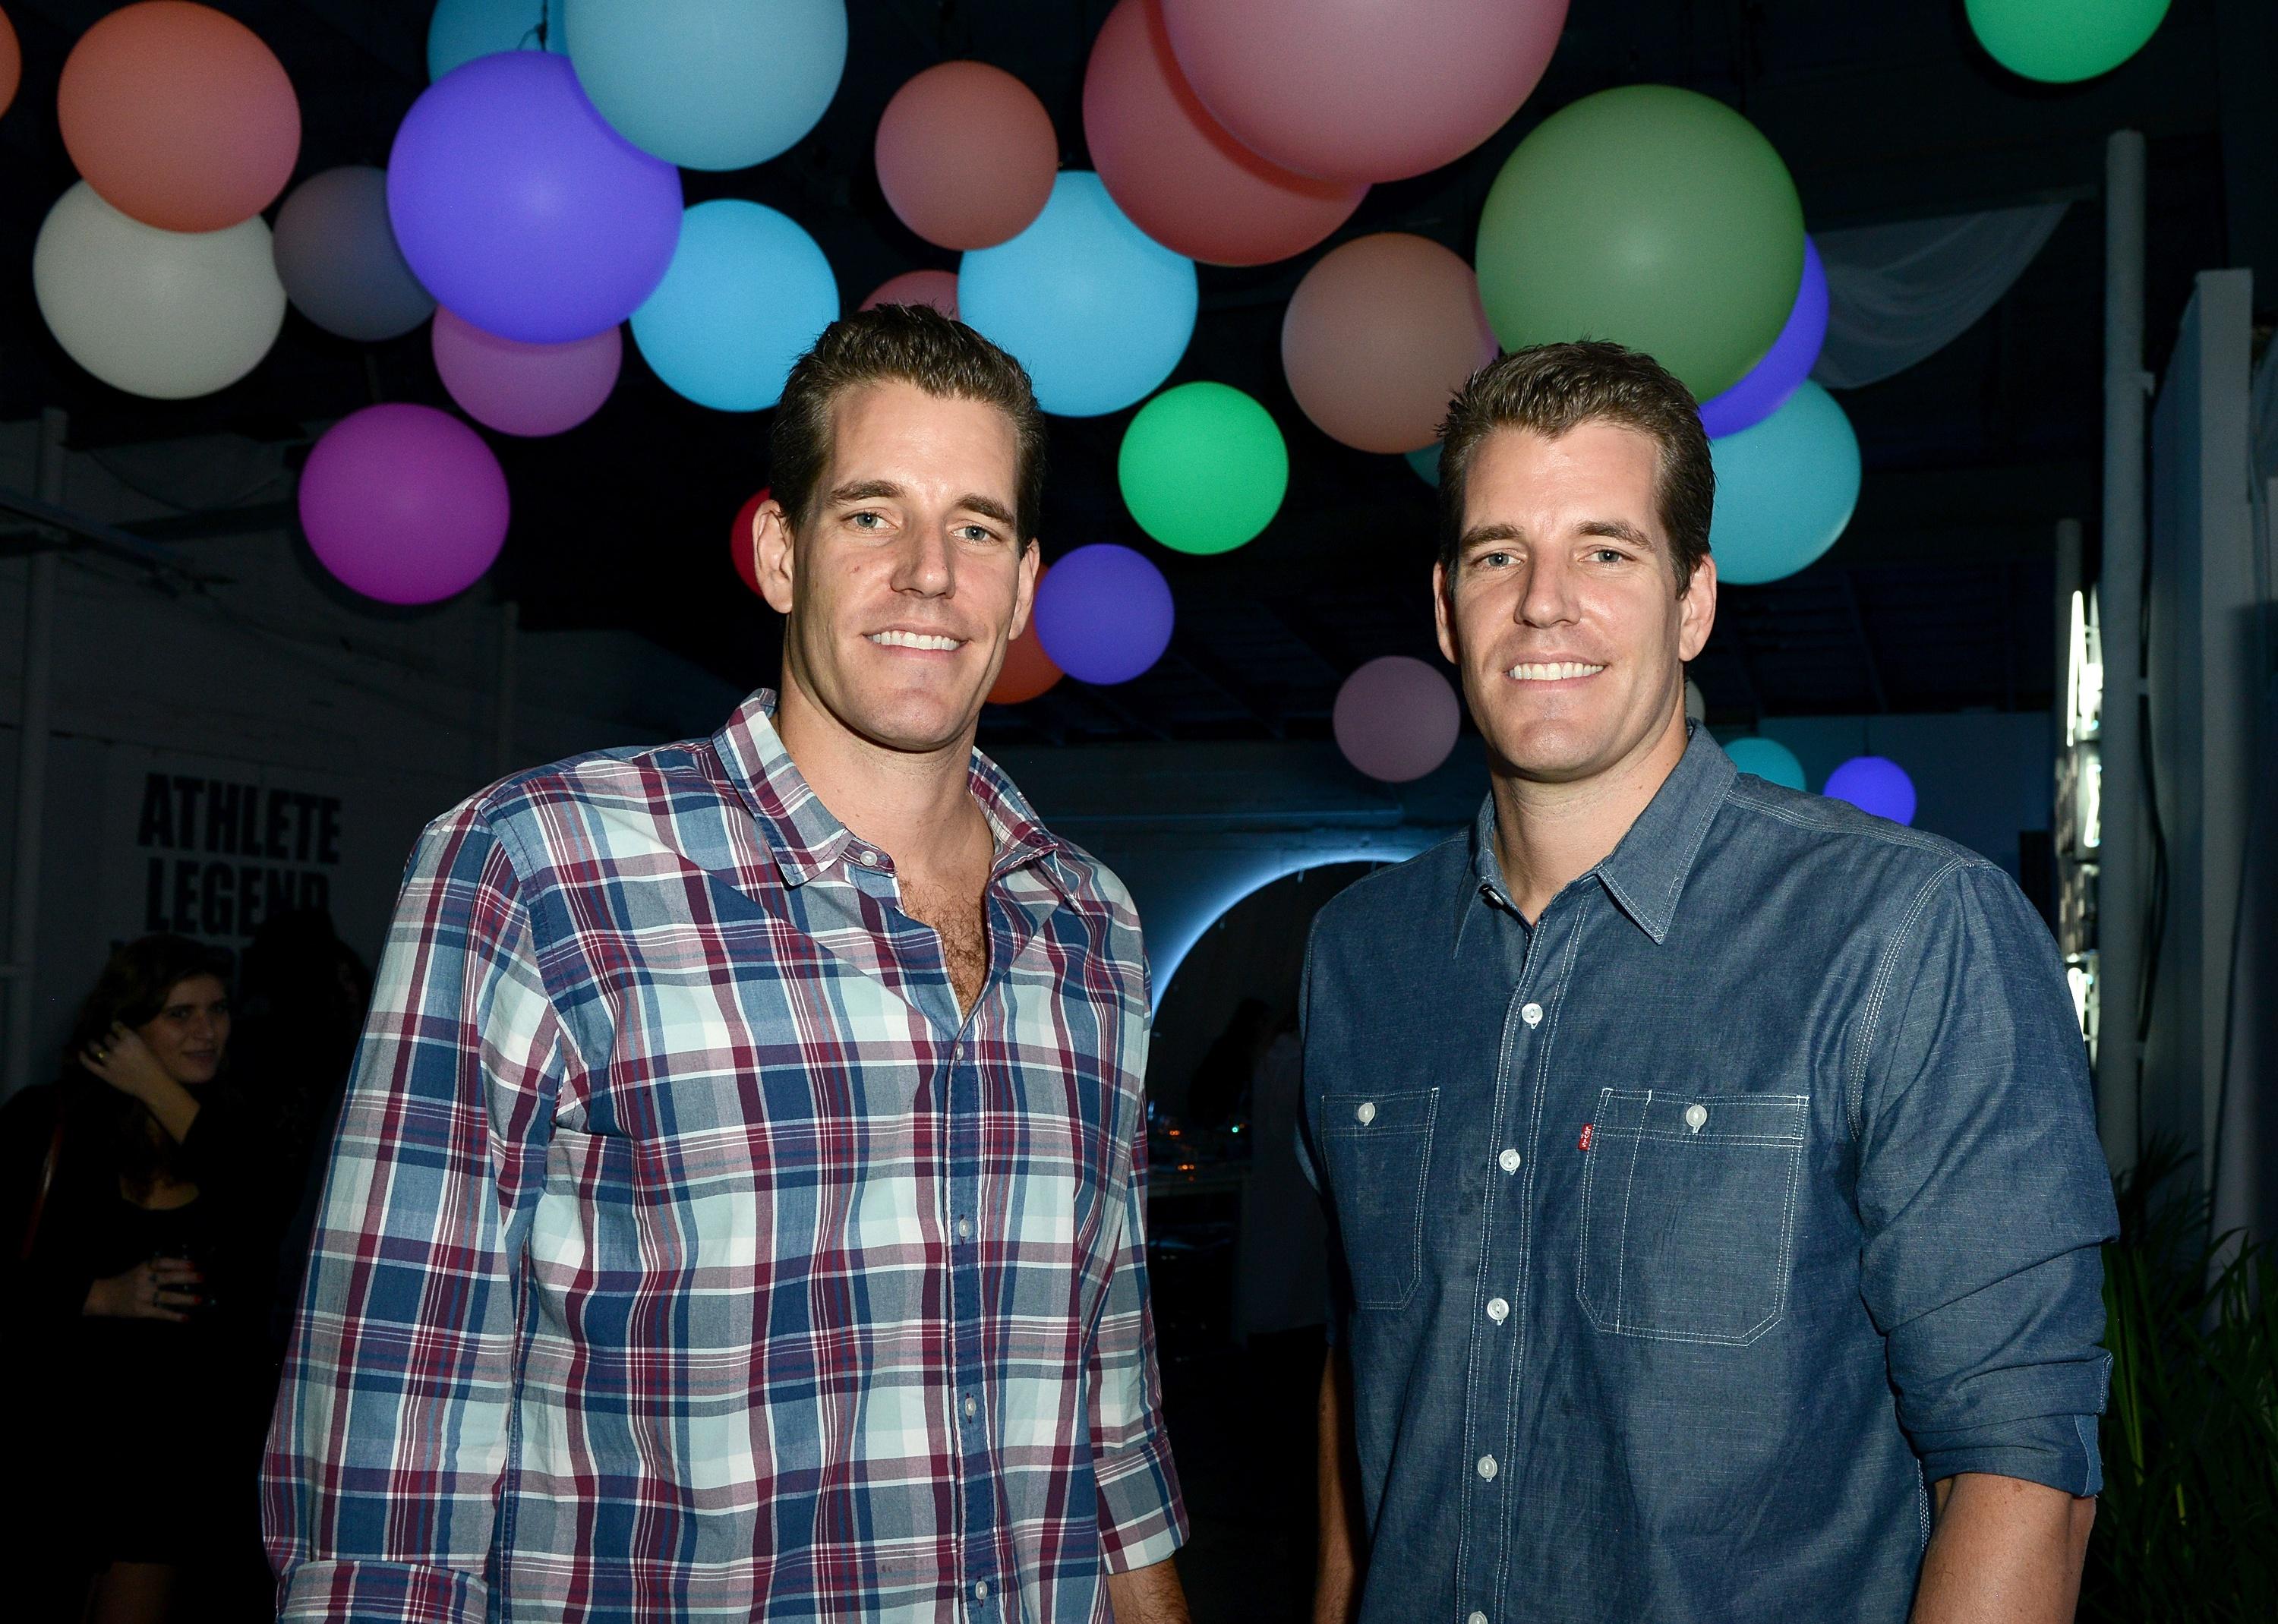 Tyler and Cameron Winklevoss in front of colorful balloons.